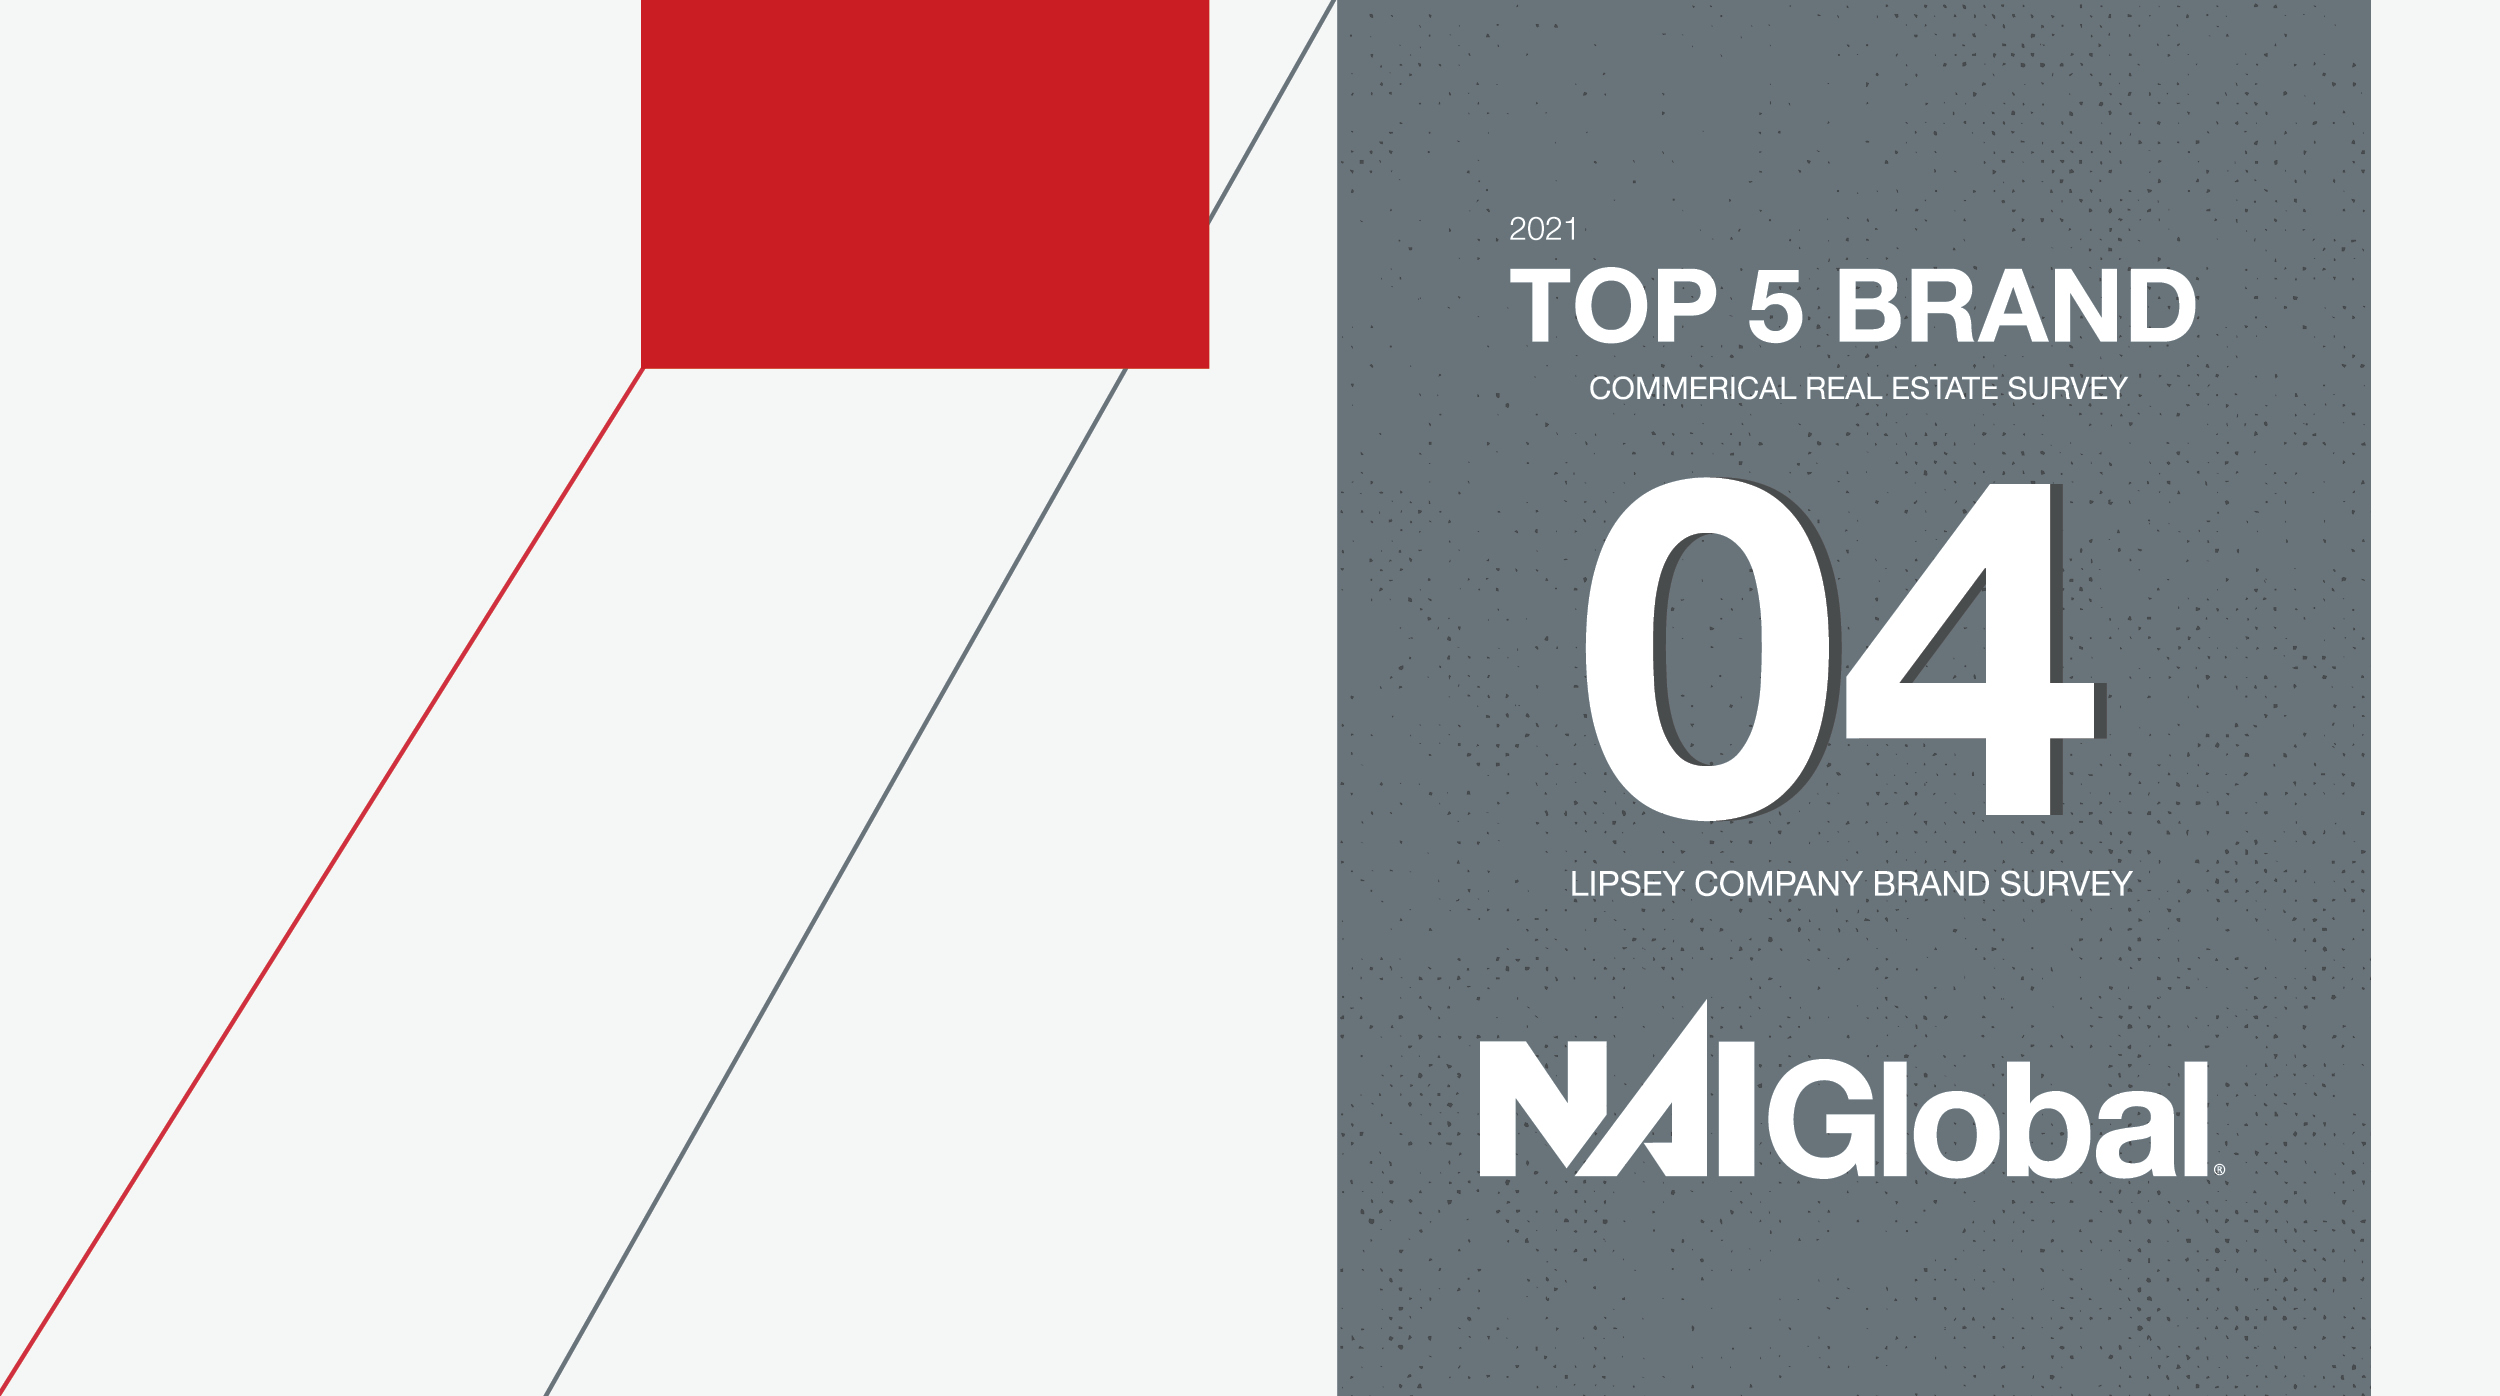 NAI Global is ranked in the top five for commercial real estate